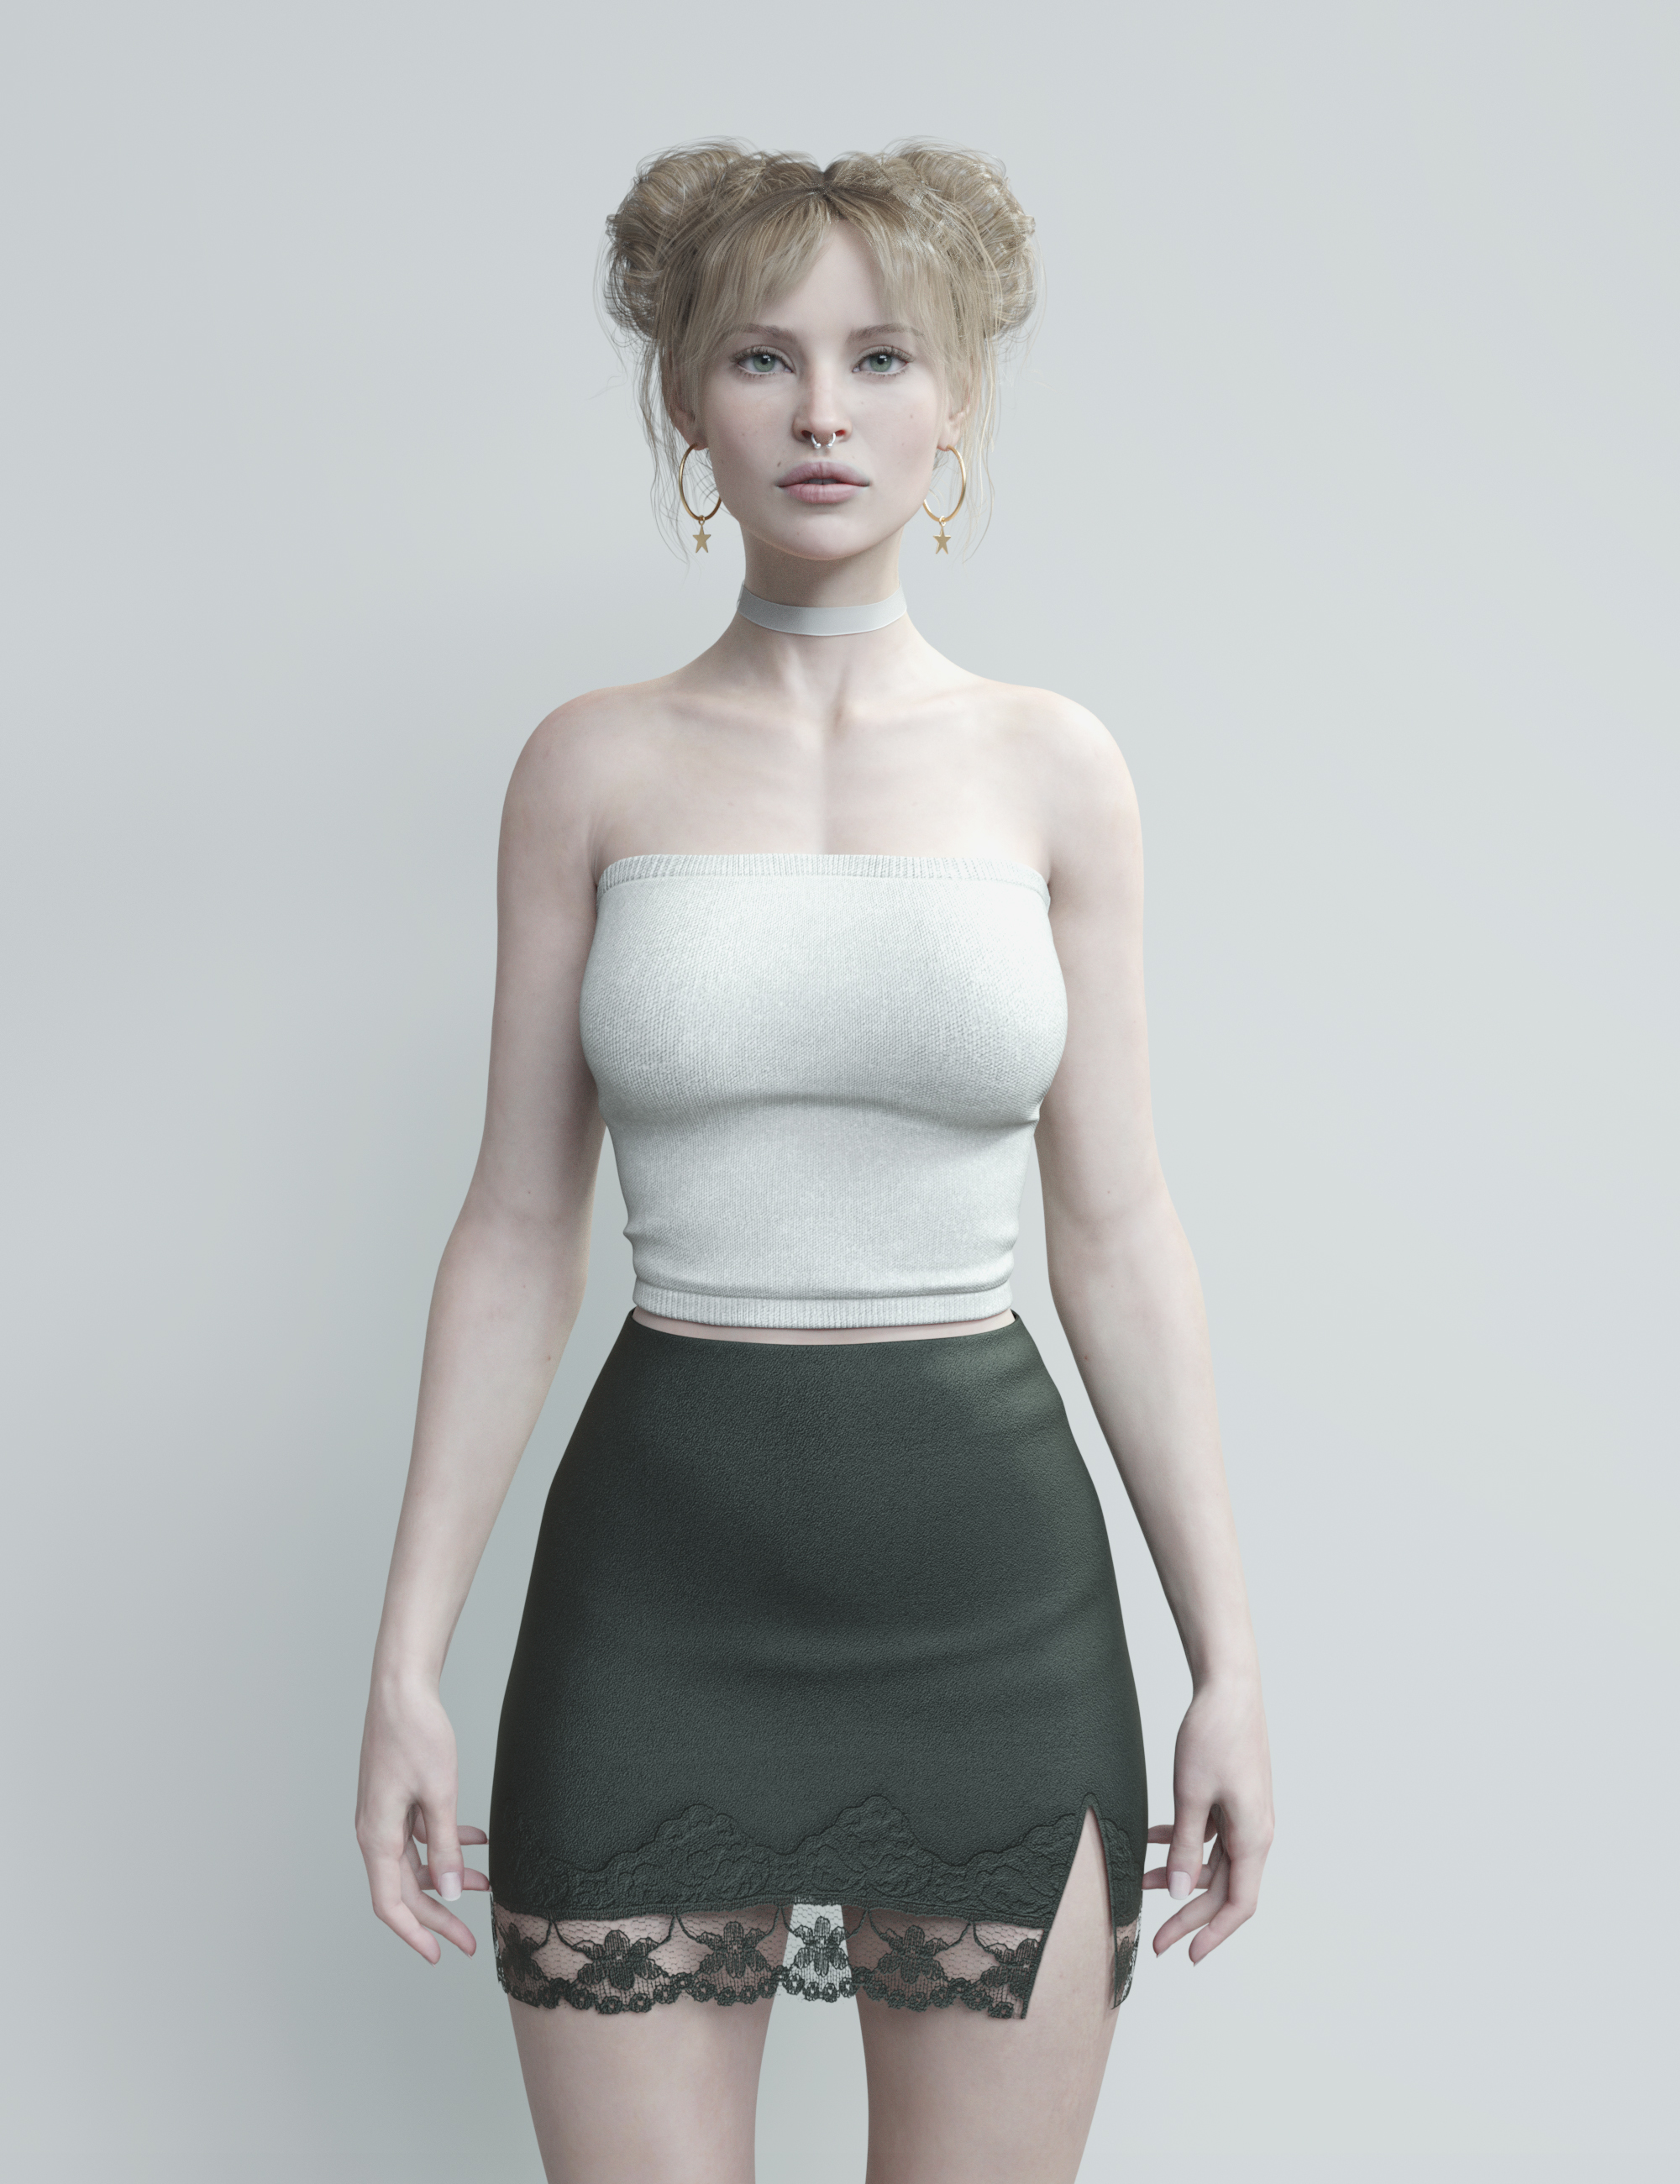 dForce Coldhearted Outfit for Genesis 8 Female(s) by: peache, 3D Models by Daz 3D